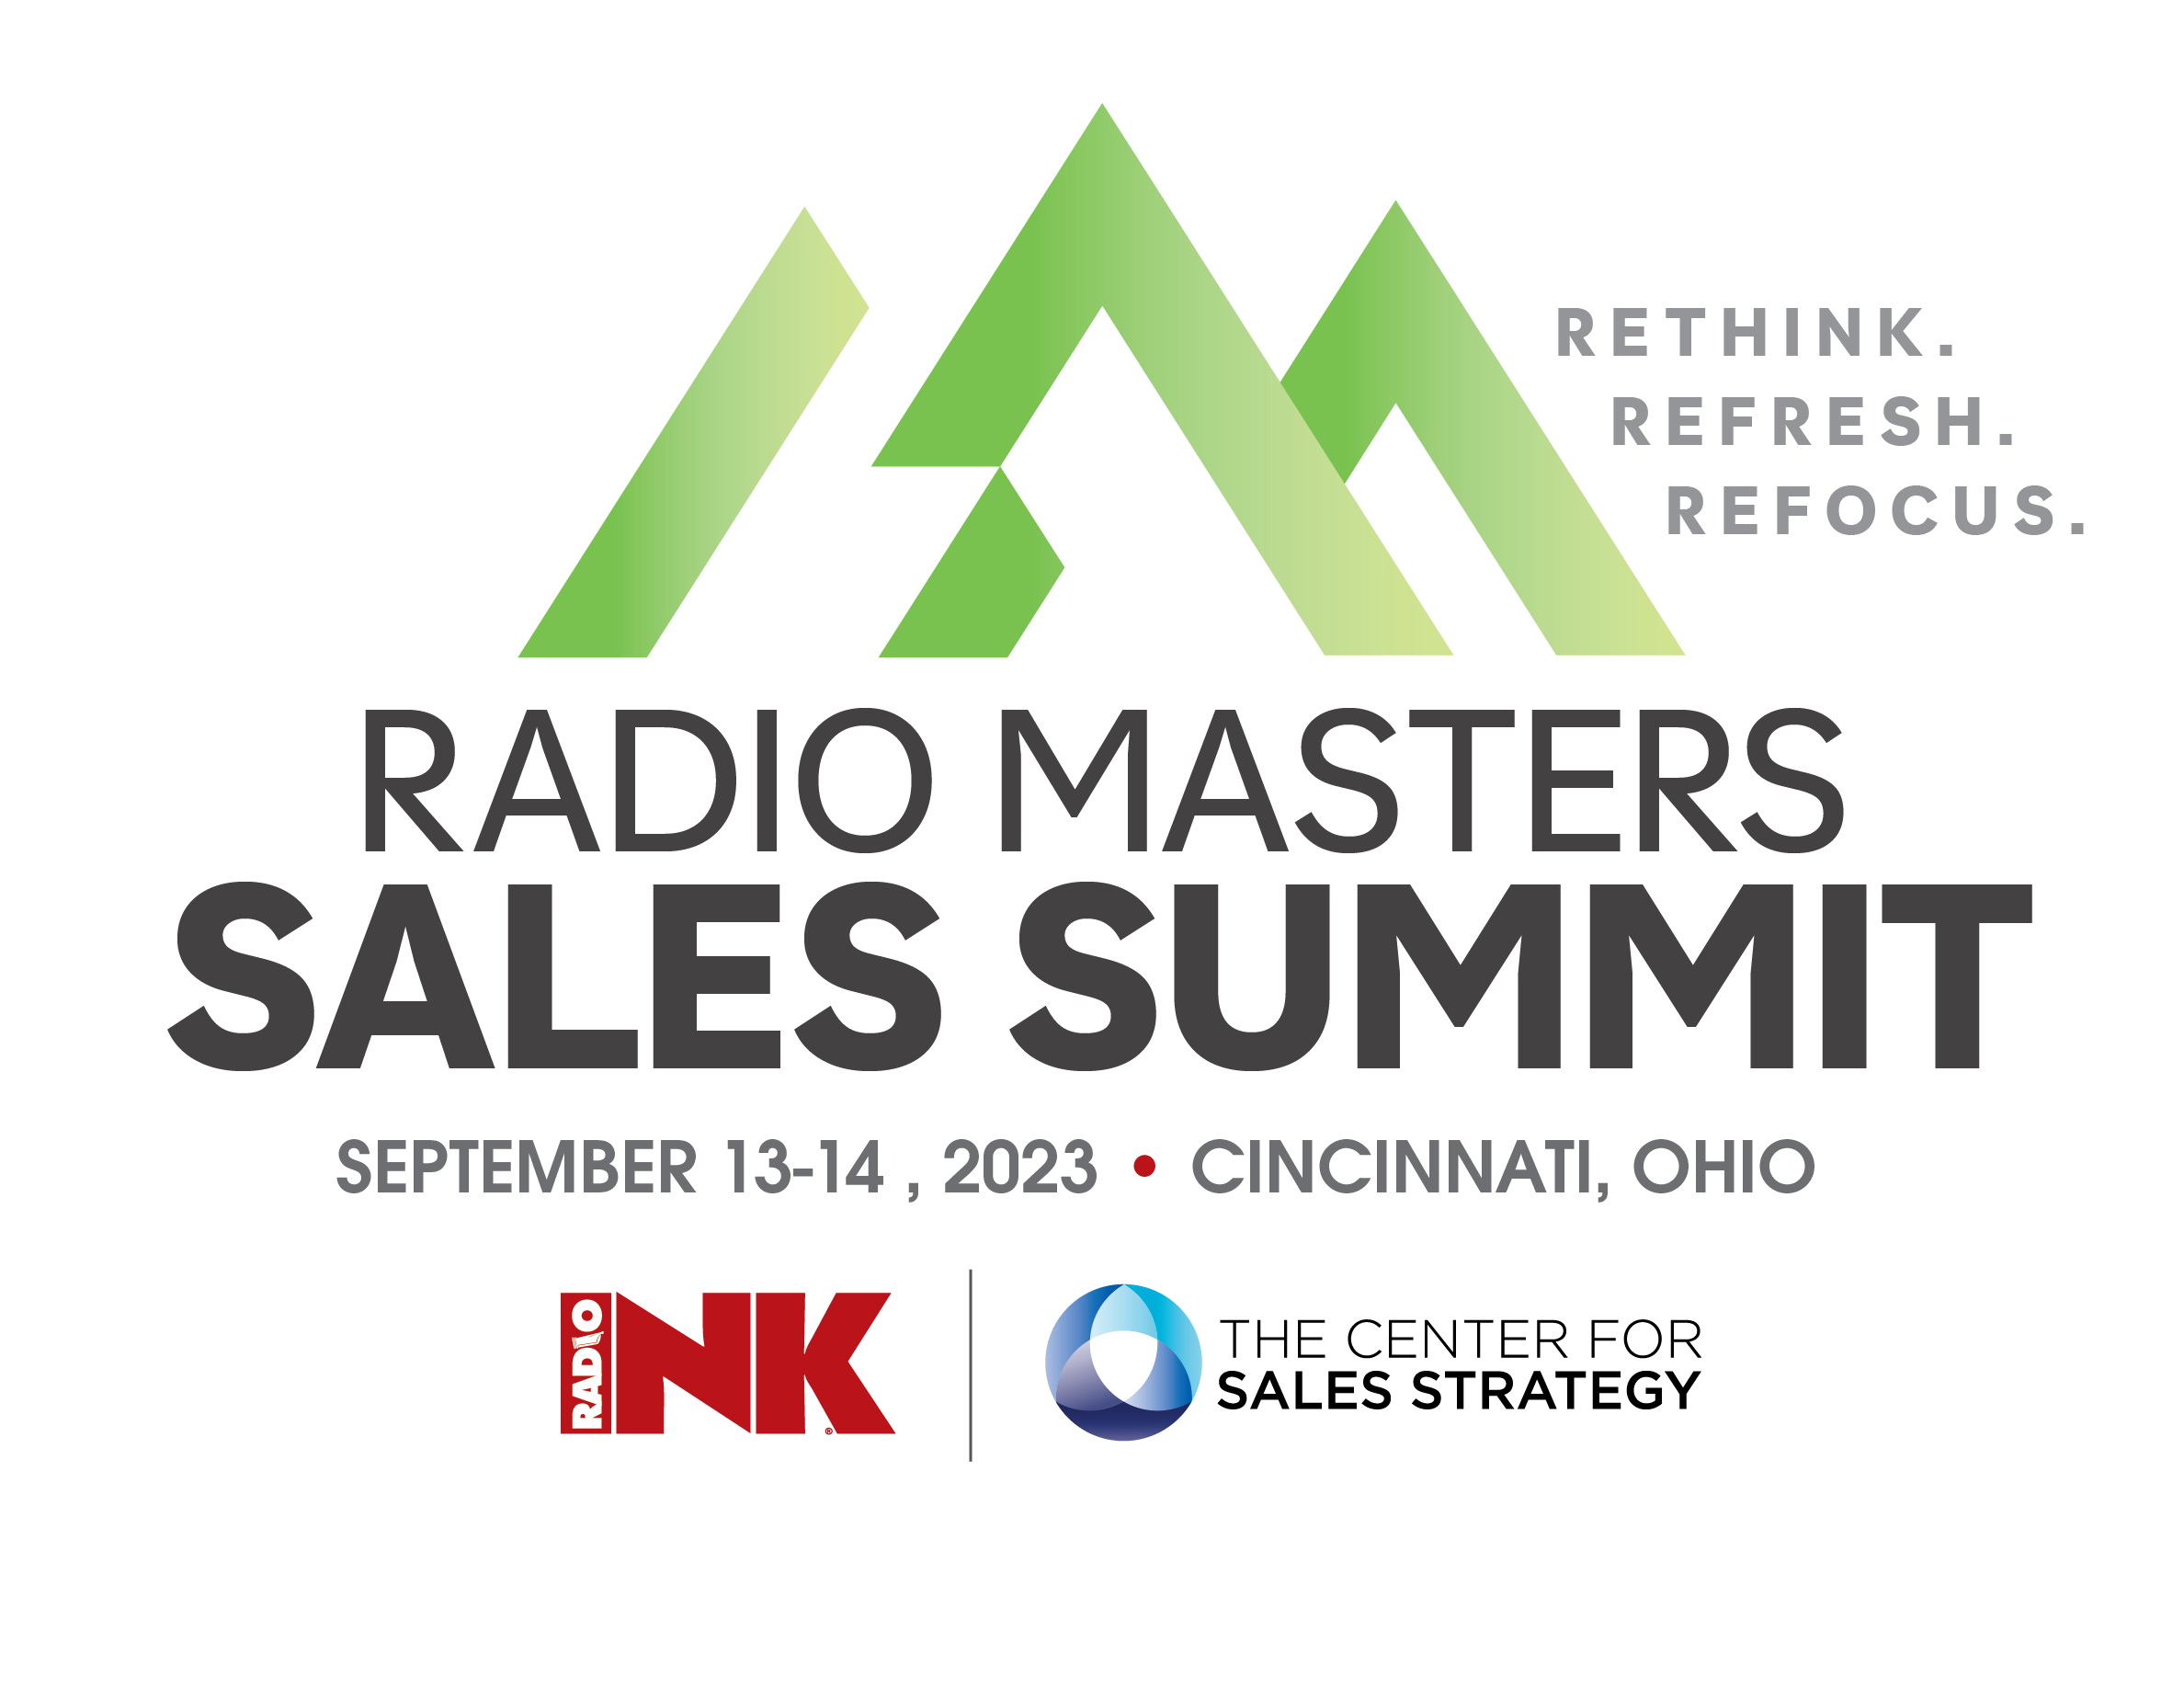 2023 Radio Masters Sales Summit - Group Rate (Up to 4 Attendees) - $997